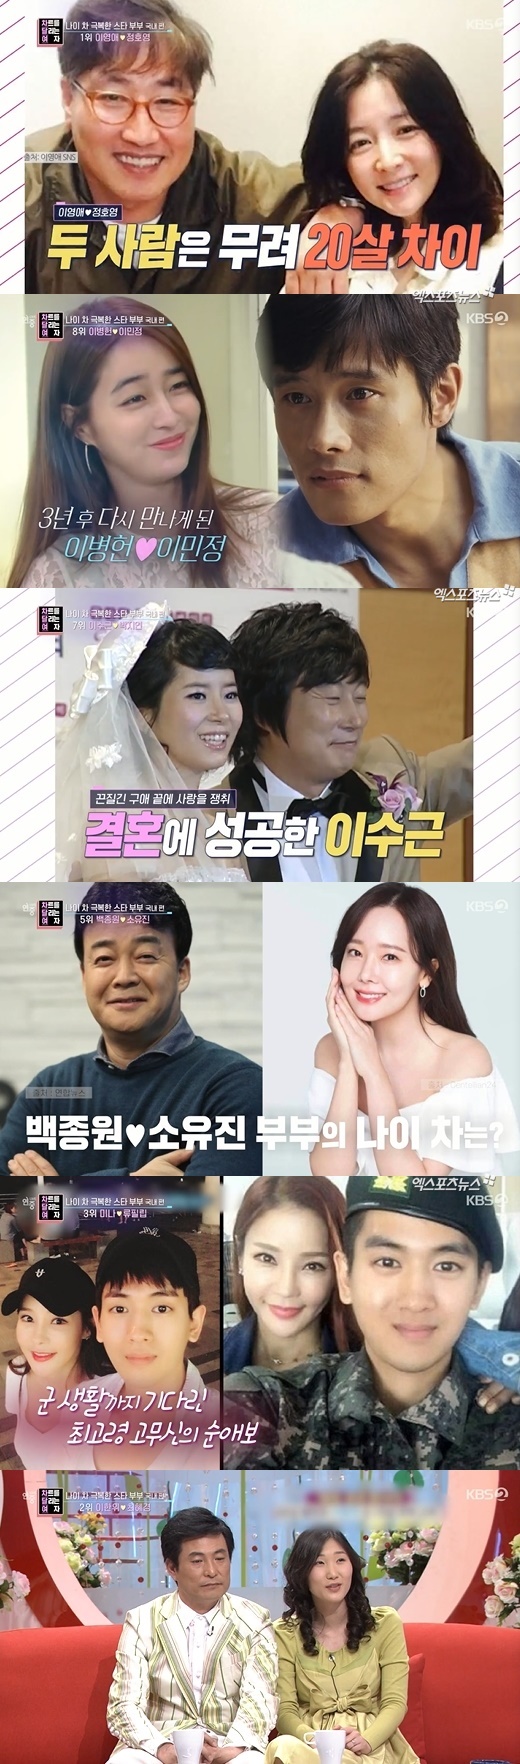 On the 13th, KBS 2TV Year-round live charting the womens corner overcame the age difference and dealt with the star couple who had a marriage.Eighth is Lee Min-jung Lee Byung-hun, a nine-year-old couple who marriages in 2013; Lee Byung-hun is 52 and Lee Min-jung is 40.They are the same age couple who overcame the age difference of 12.Lee Byung-hun met in 2016 with an acquaintance introduction and developed into a lover, but suffered a breakup because of his different situation.Three years later, the two met again and jumped over the age difference and marriage.Lee Min-jung said that the person who picks the bottle cap with a spoon in the entertainment is his ideal type, My husband picked it with his teeth.Lee Byung-hun considered code the most important thing in love; Lee Min-jung was also well known as a humorous entertainer.Seventh is Lee Soo-geun Bakjiyeon, a married couple in 2008.Bakjiyeon is said to have been a stylist of Park Jun-hyung, followed by Lee Soo-geun for six months; Lee Soo-geun did not give up even if Mr. Bakjiyeon refused.Tears in the situation of separation were said to have touched Bakjiyeons heart on Lee Soo-geun; Bakjiyeon was against the kindness during the marriage ceremony.I should say it is an age, he said.Mr Bakjiyeon has come to a crisis where he has a kidney transplant while pregnant with his second fetus.Lee Soo-geun went to the disease with his wife, but came too late and was told that the mothers kidney had already been broken; he is still dialysis.Lee Soo-geun flagged Bakjiyeons health with a birthday cow.The sixth place is Yoo Hyun-sang, Choi Yoon-hee, a swimmer and the sister of the sports team One. The ages were 24 and 37.Yoon Hyun-sang met Choi Yoon-hees parents on a date, but they did not even look at him. The two men raised a secret marriage ceremony in 1991,When his eldest son was born, his father-in-laws mother-in-law was angry.The fifth place is Baekjong, which is 56 years old this year and So Yoo-jin is 41 years old.Sooo-jins parents also said they were 30 years old and envied their usual age difference.So Yoo-jin said in the entertainment, I hated it because I had a lot of age difference, but I met a few times and Baekjong One was humorous (I liked it).) I talk every day now.Fourth place is Seo Taiji Lee Eun-sung; in 2008 Lee Eun-sung appeared in the Seo Taiji music video and developed into a lover.In 2013, he announced marriage: 16 years old. He was a fan of Seo Taiji in The Rounding; he is said to sometimes feel the generation gap.Seo Taiji told the entertainment that I dont care if I was such a star in the old age, I dont care if I talk about old times.At the time of the childrens debut with Seo Taiji, Lee Eun-sung was five years old; the two have a daughter.The third place is Mina Liuth, a young couple who is seventeen years old and seventeen years old.The first time she saw Mina, she was in love with her first-time mother-in-law, who was nine years old.I cried for a while. Minas mother was upset that she was only guilty of loving a young person.It was met with opposition from both families, but it had a happy ending.Philip Roth said, I will love you even if I am born in my next life. Mina expressed affection, saying, It is the most wonderful in my eyes.Lee Han-wi said, There is no generation difference. You have to do well. She has two sons and two daughters and lives happily.The top picks are Lee Yeong-ae and Jeong Ho-young.Lee Yeong-ae had a quiet marriage ceremony and a highly secret marriage ceremony in Hawaii in 2009.Lee Yeong-ae has said that her husband is trustworthy and sincere, and has a very deep feeling with feelings beyond love.In one broadcast, she revealed her husband and twin children: Jeong Ho-young, a Korean-American businessman, said Property is two trillion One. The age difference between the two is as much as 20 years.Lee Yeong-ae confessed that there was no fear of marriage and that he was mentally relaxed after marriage.Meanwhile, Kim Jae-deok, who won the second round of the 2020 Tokyo Olympic Archery, was interviewed.Kim said, One of my dreams was to win a gold medal in the mens team, and I was satisfied with it and I was not sorry for this Olympics.I will be a player who runs one by one toward dreams and goals rather than playing because there are world championships. Wikimikki Choi Yoo-jung also left a congratulatory message for Kim Jae-deok: Choi Yoo-jung is one of Kim Jae-deoks favorite celebrities.I was surprised, too, if this is really right, it was so embarrassing and good, he said frankly.Choi Yoo-jung said, Thank you for giving me one throughout the Olympics, selling SNS and sending me a message.I will do my best to be a player who can work hard and achieve dreams and goals by working hard more than a few times the heart that received one. In the Legends corner of the All-Time, the actress Troika 2 was released from the past to the present. It also included interviews with KBS drama Red shoes So Hyun and Choi Myung-gil.Photo: KBS Broadcasting Screen